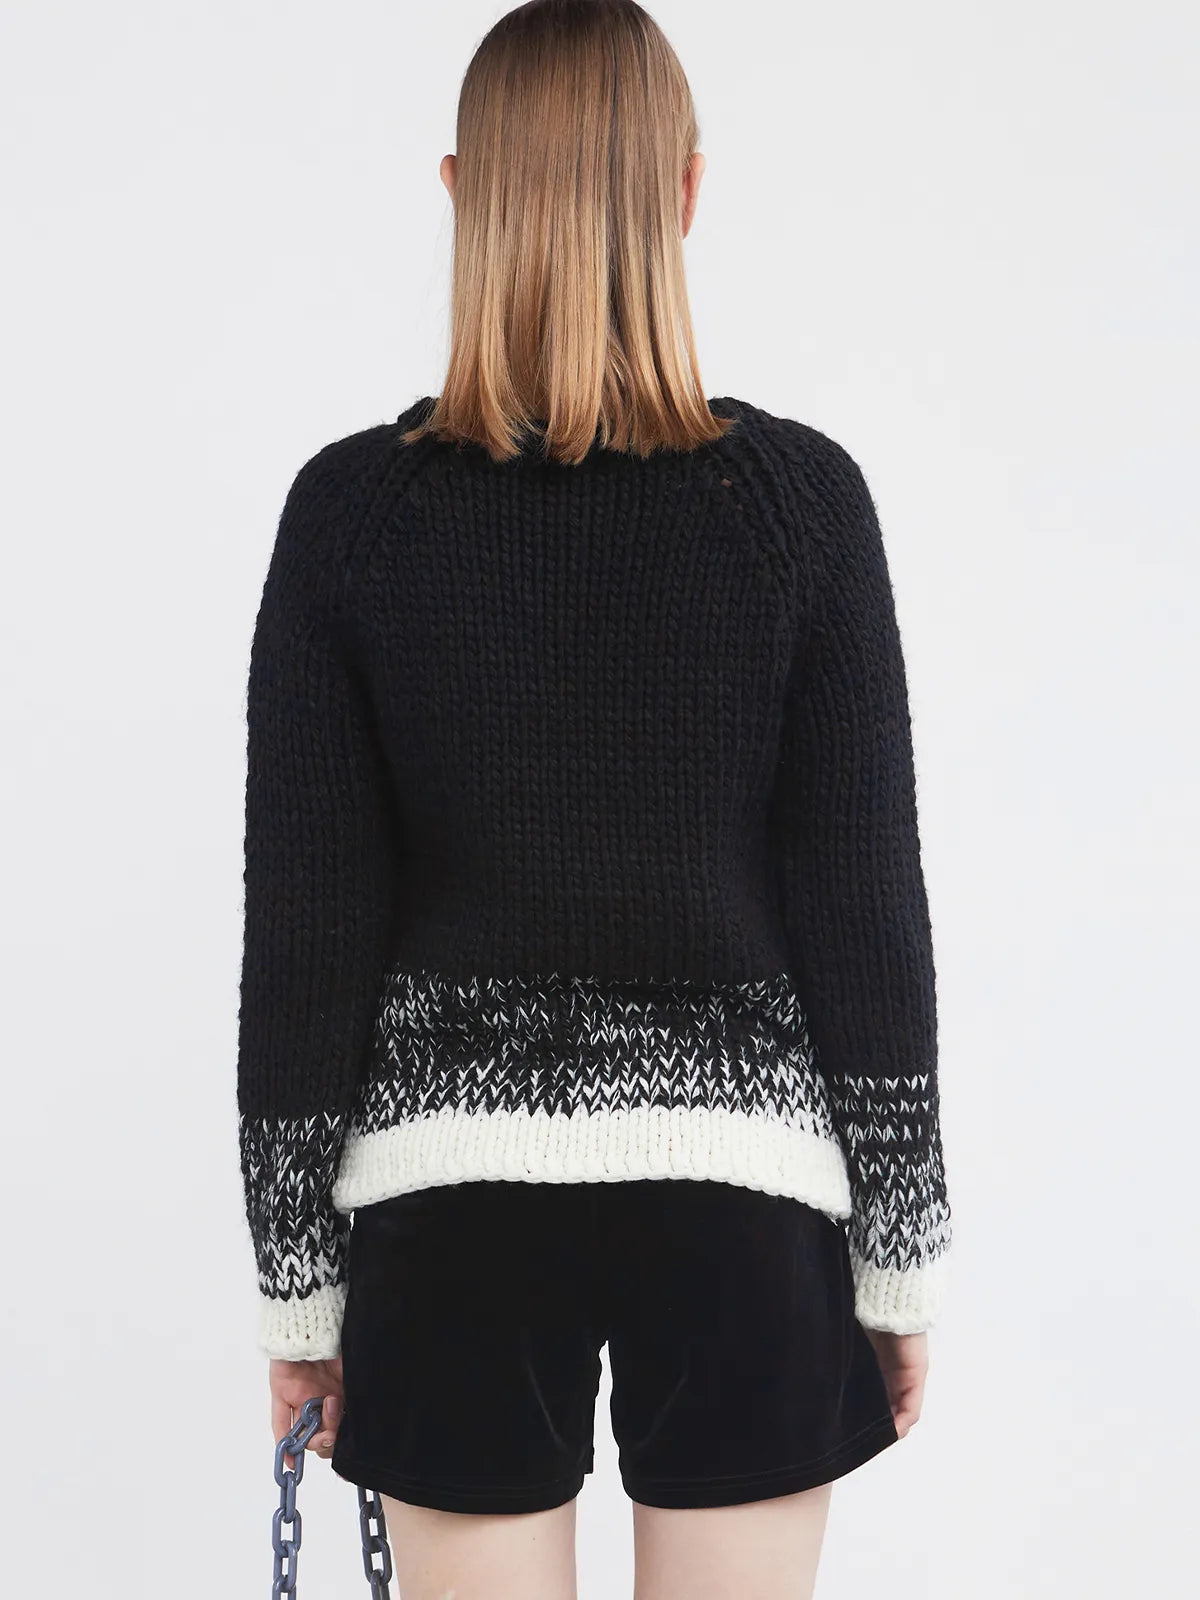 Round Neck Short Knitted Sweater With Crochet Flowers